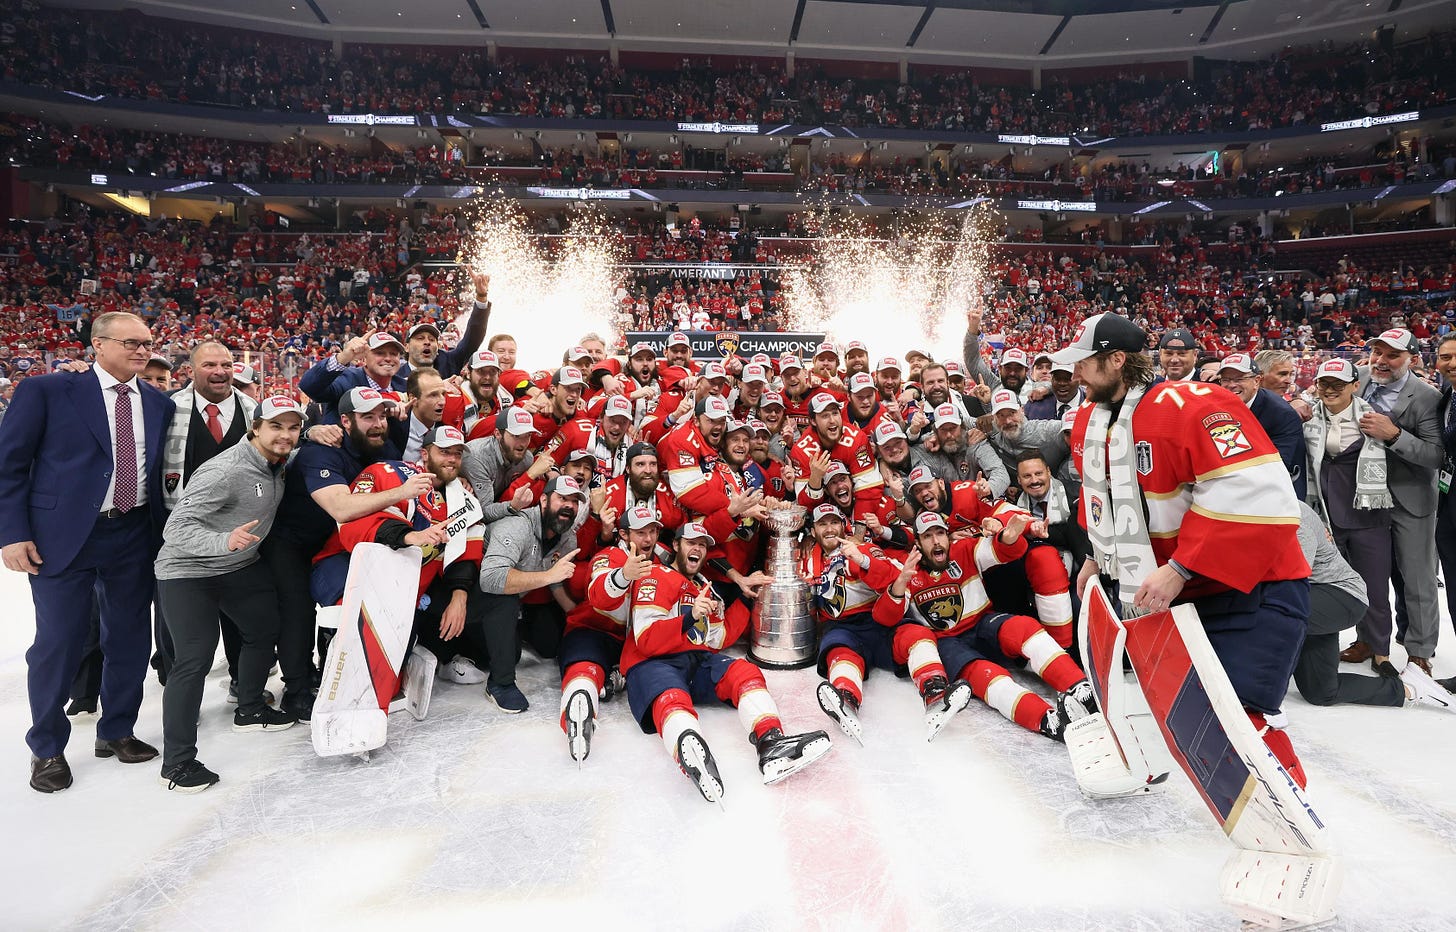 The Florida Panthers players, coaches, and executives pose together with the Stanley Cup to celebrate their championship win.